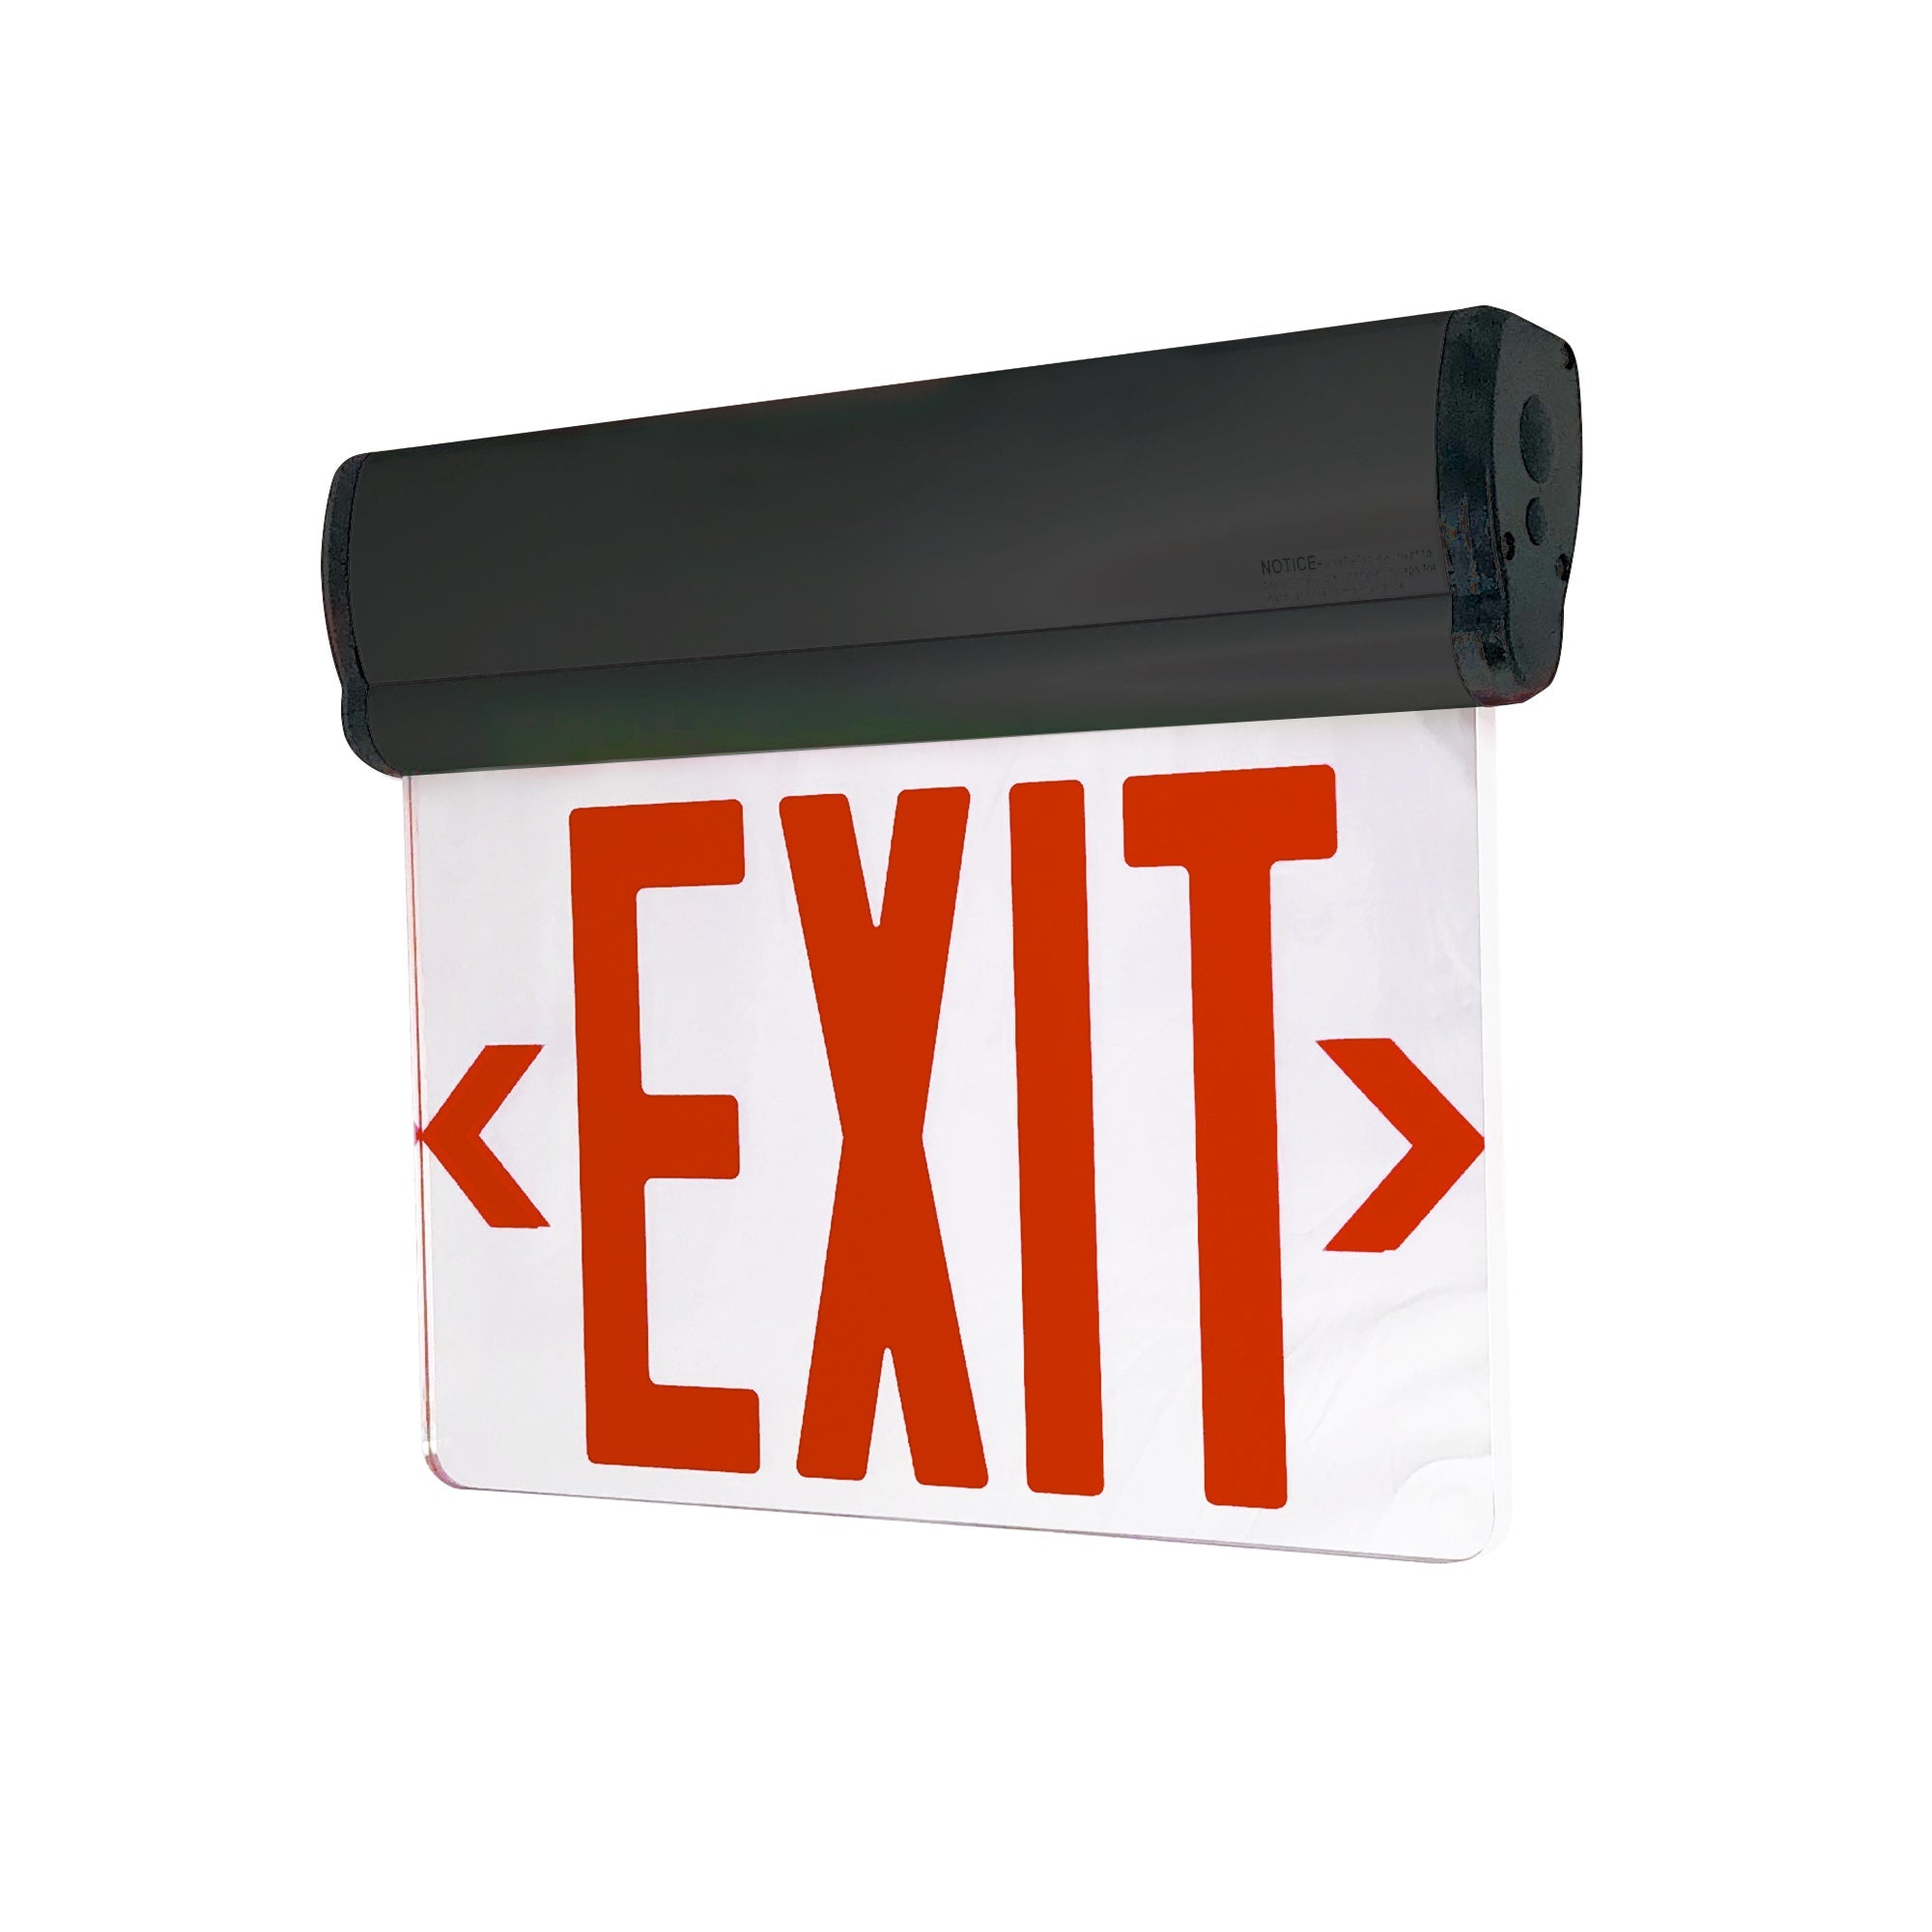 Nora Lighting NX-811-LEDRMB - Exit / Emergency - Surface Adjustable LED Edge-Lit Exit Sign, 2 Circuit, 6 Inch Red Letters, Single Face / Mirrored Acrylic, Black Housing